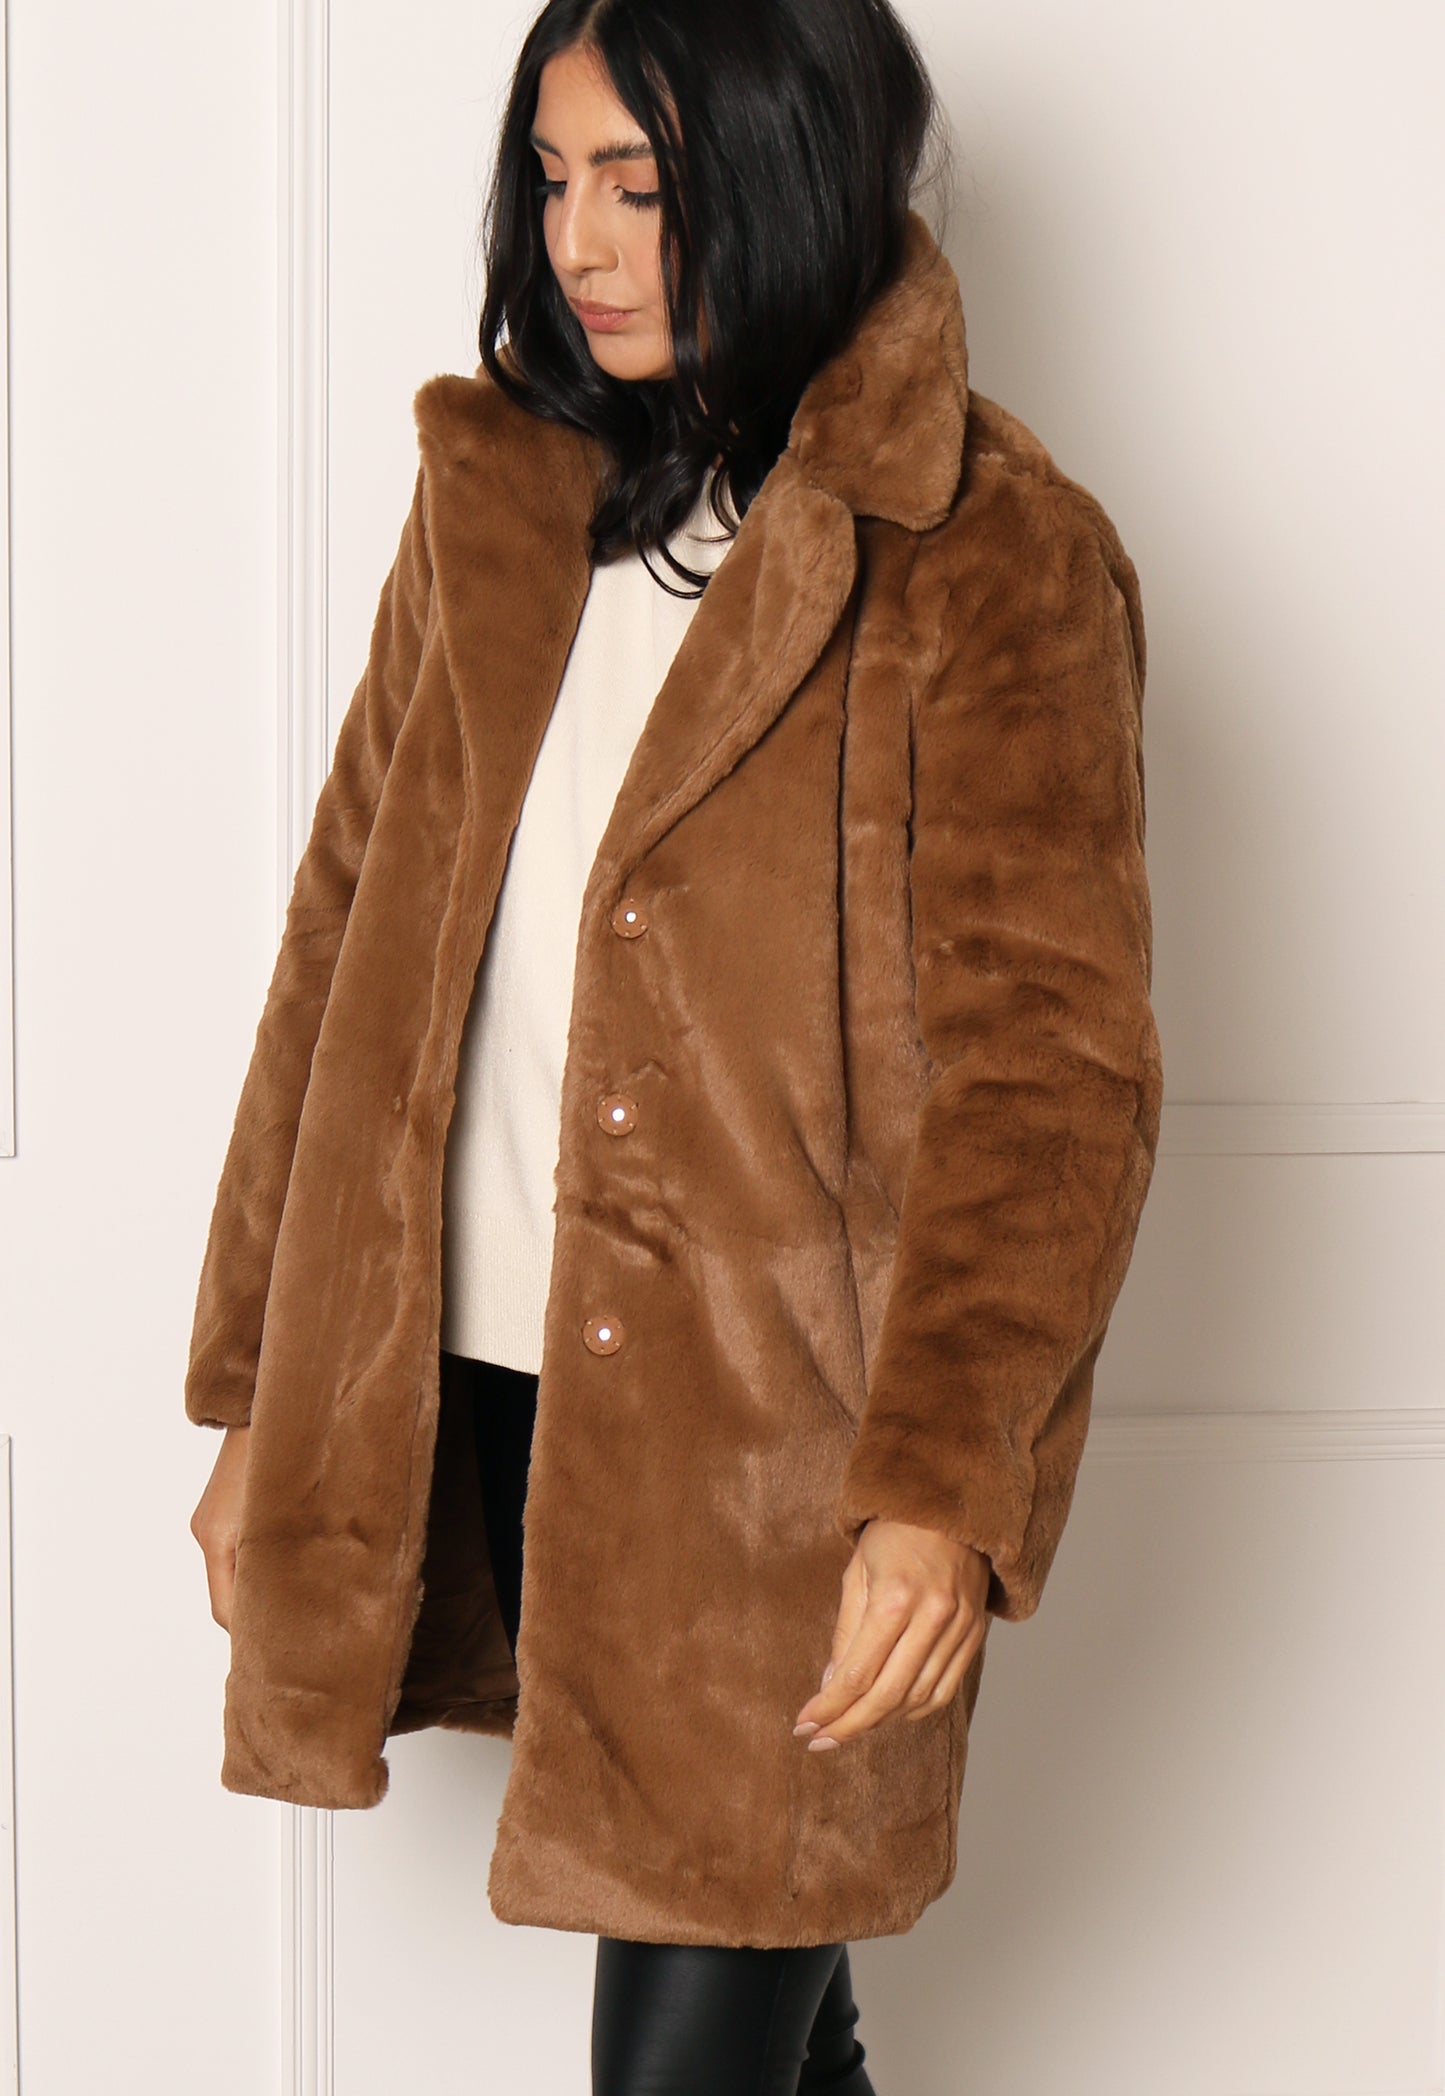 VILA Ebba Vintage Style Faux Fur Midi Coat with Collar in Light Brown - vietnamzoom